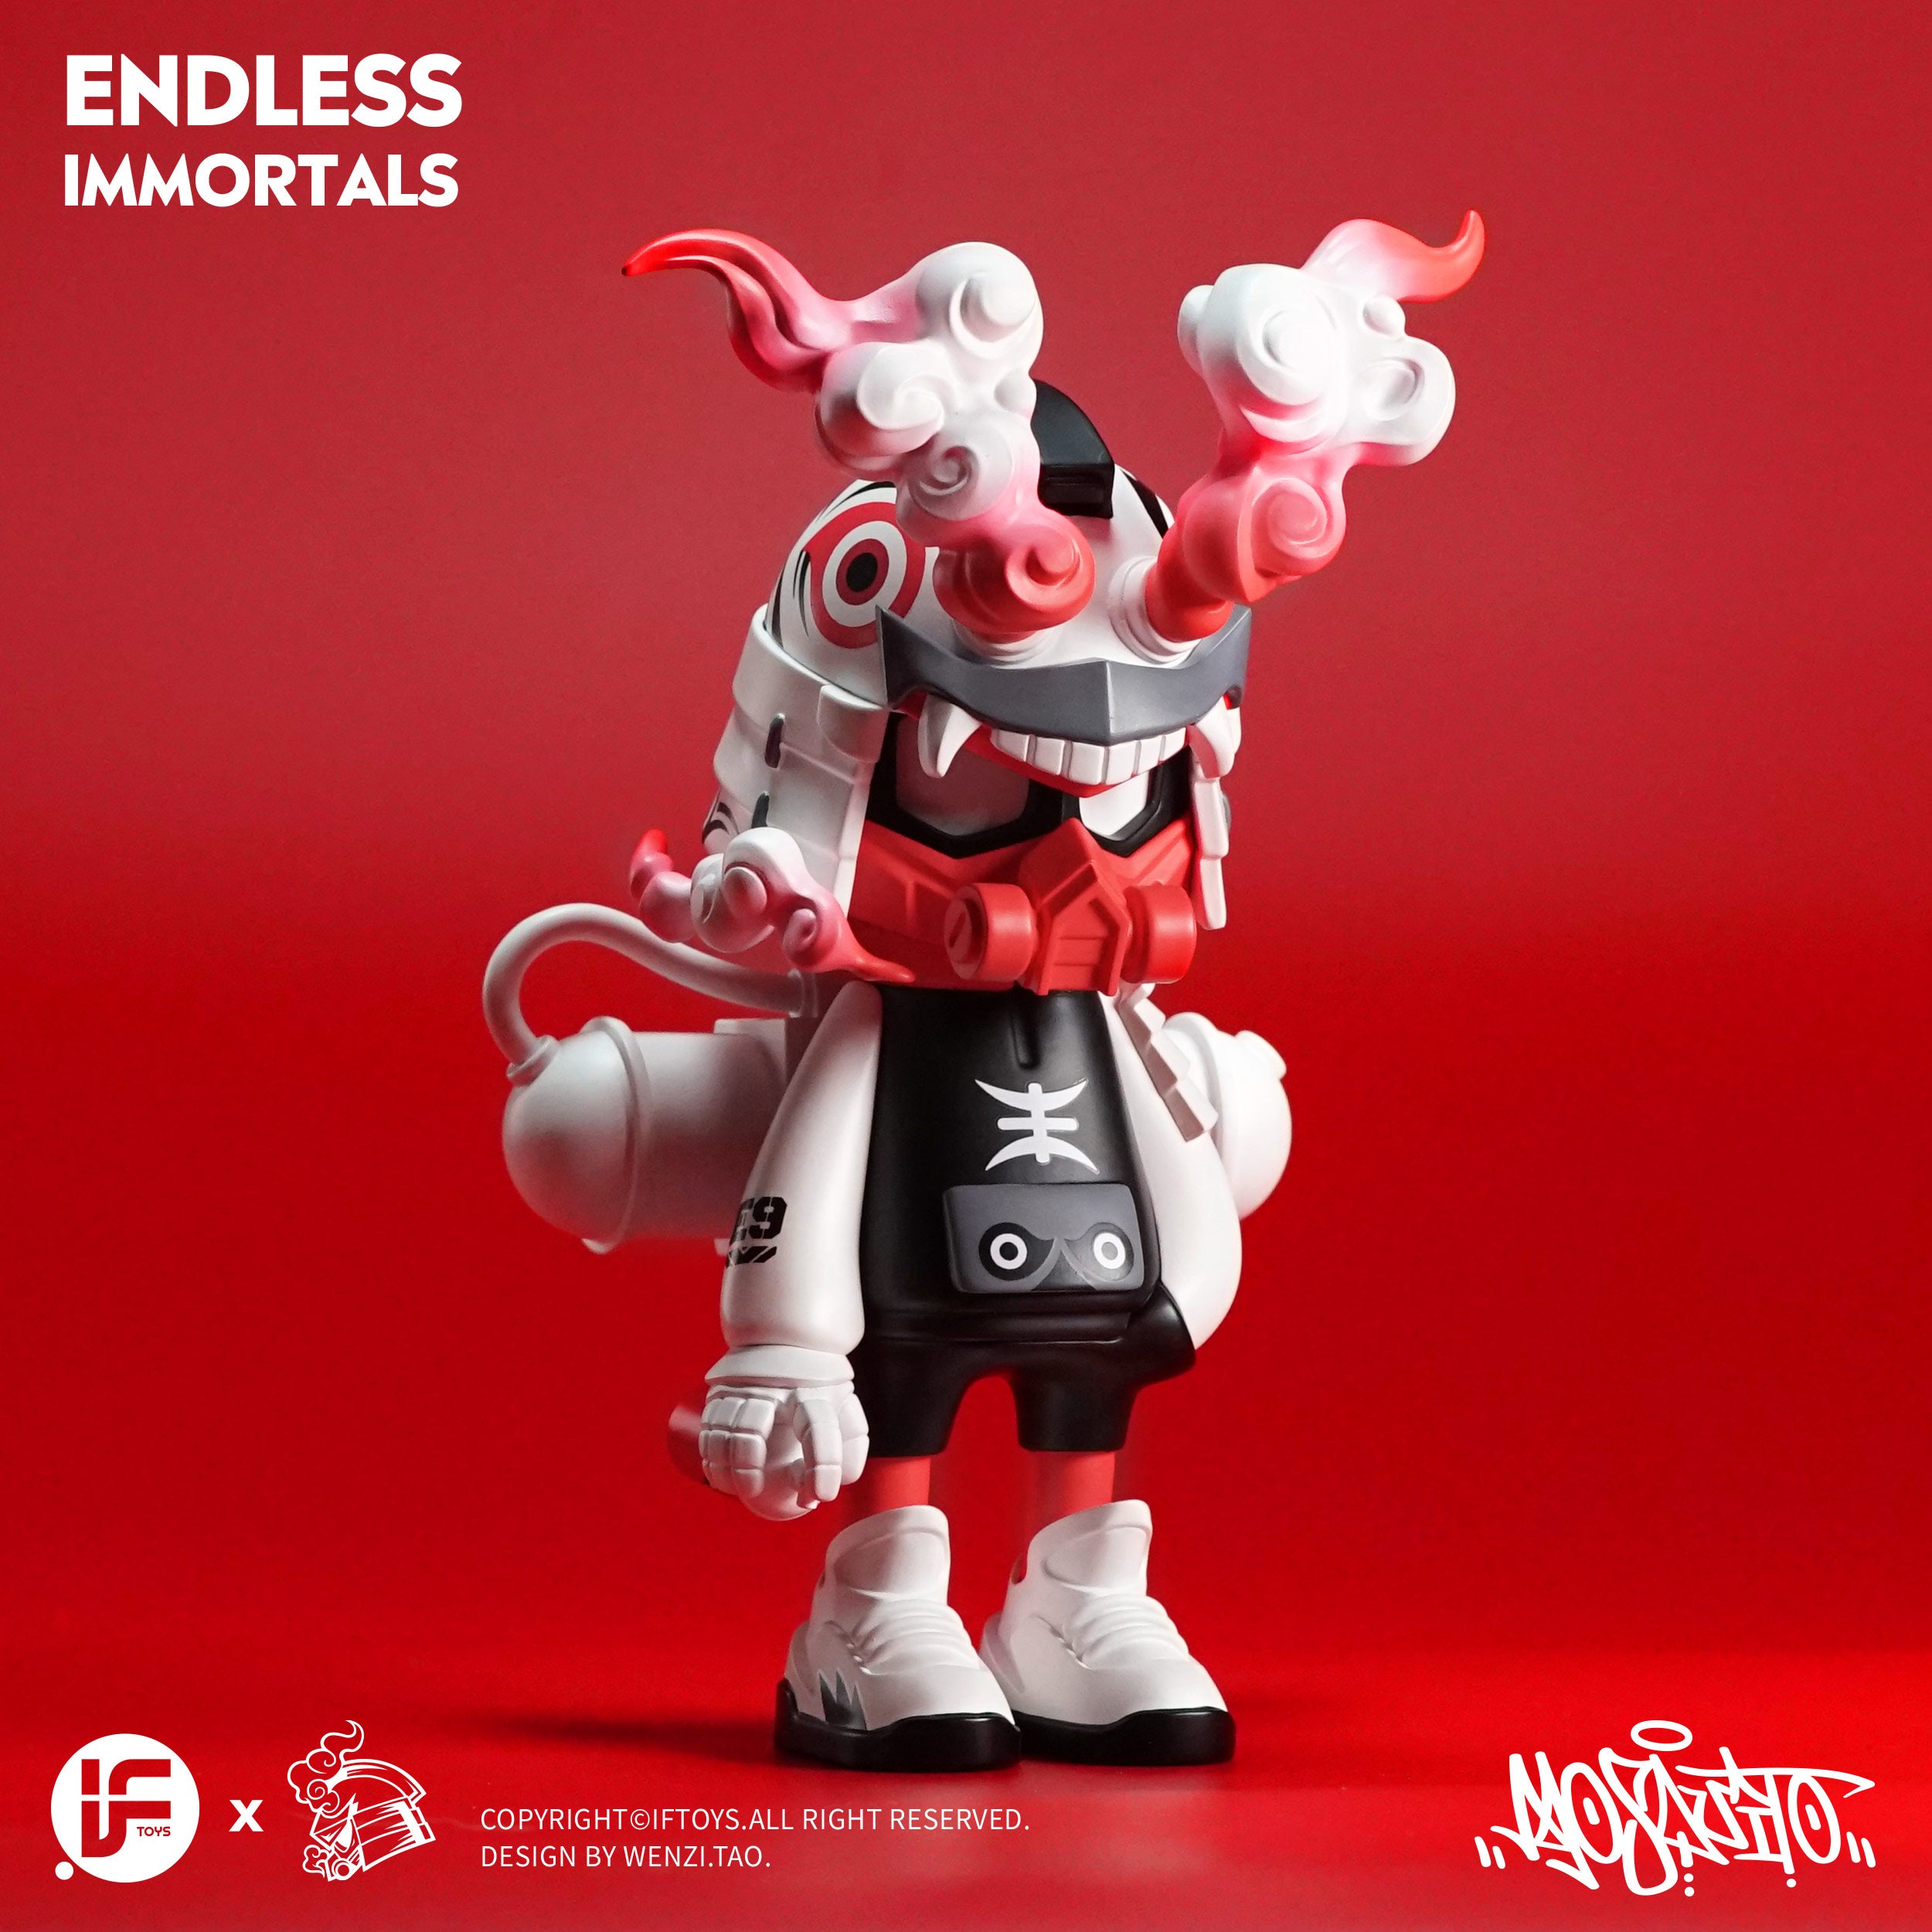 ENDLESS IMMORTALS - THE CLOTH TIGHT (2022 YEAR OF TIGER LIMITED EDITION) By Wenzi.Tao x Iftoys